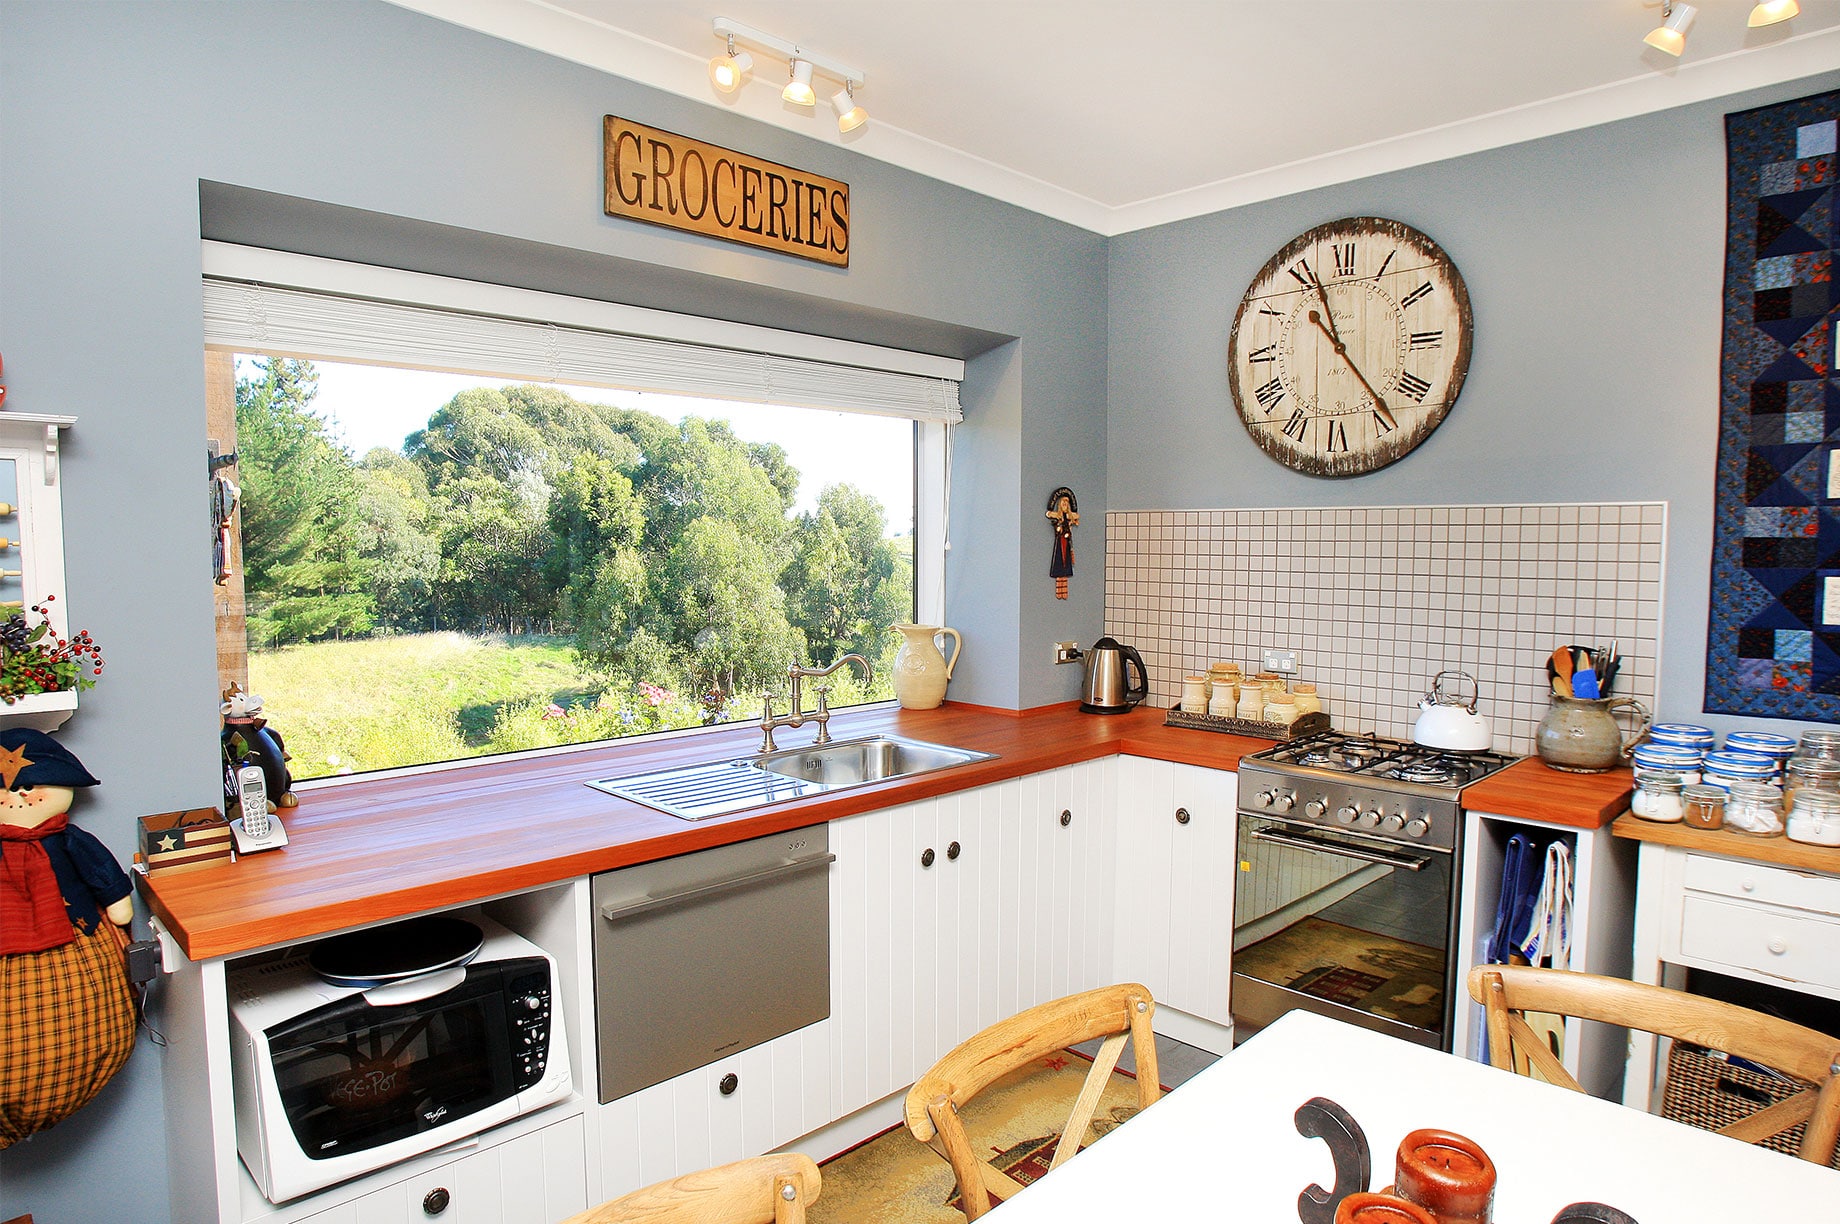 White and wooden kitchen with blue walls interior